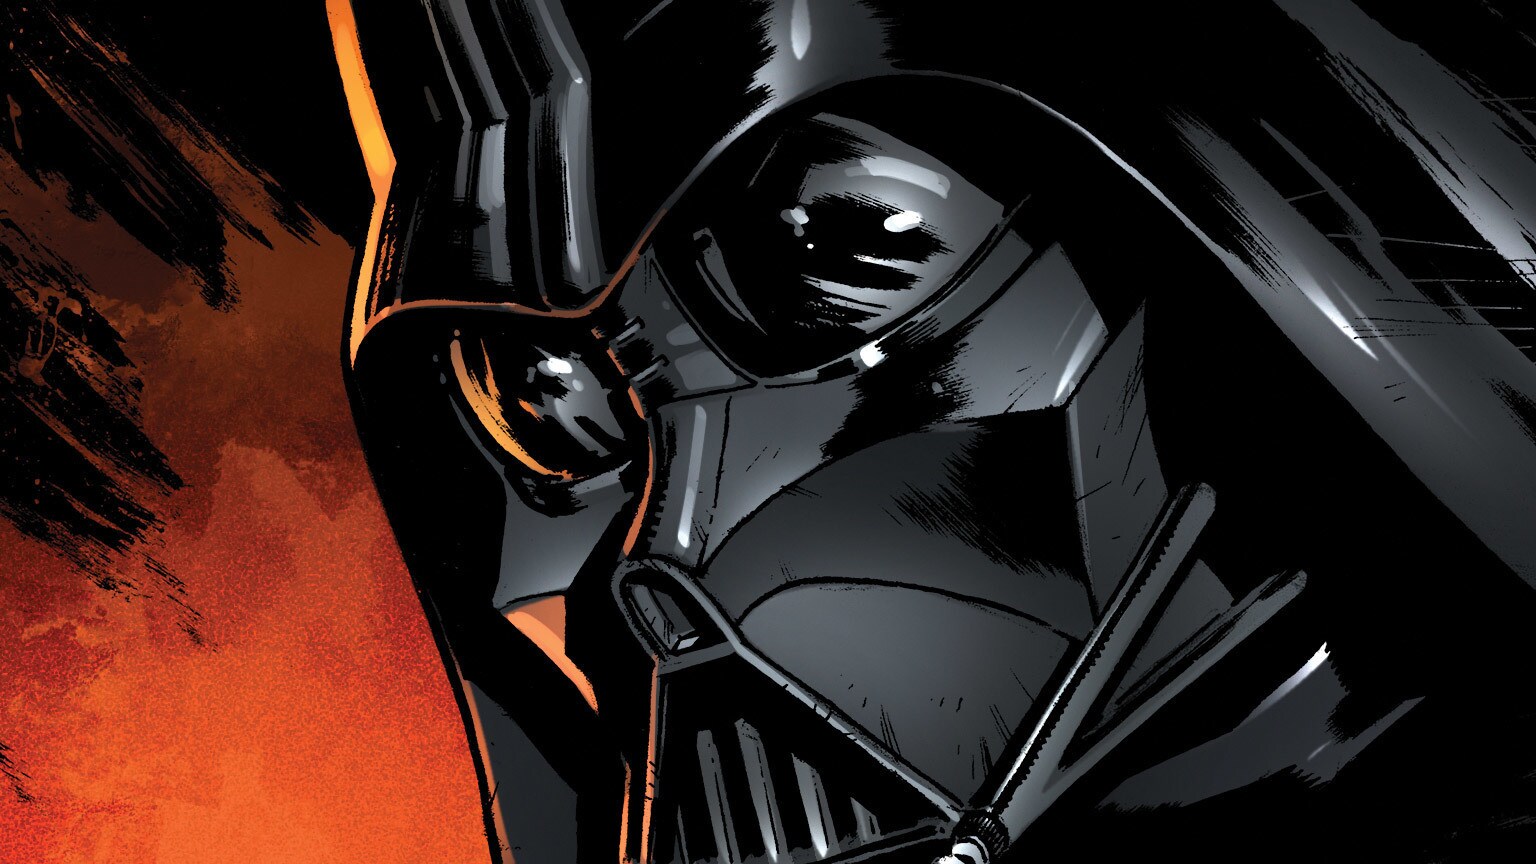 The Eye of the Webbish Bog Summons Vader Once More in Marvel’s Star Wars: Revelations #1 – Exclusive Preview